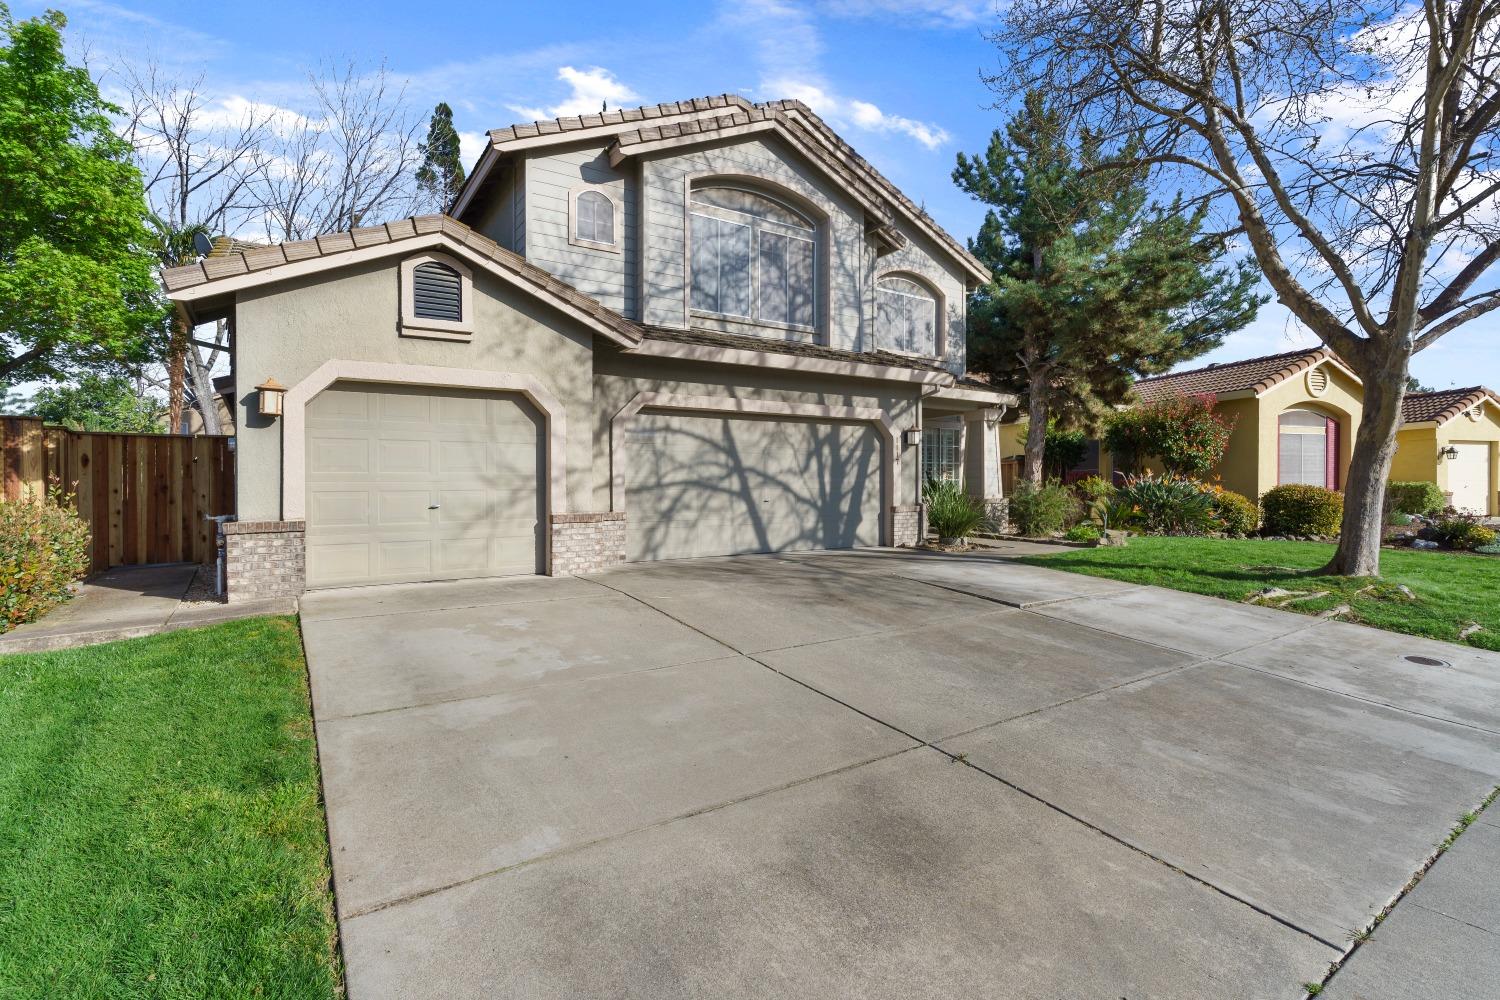 Photo of 1117 Caragh St in Roseville, CA